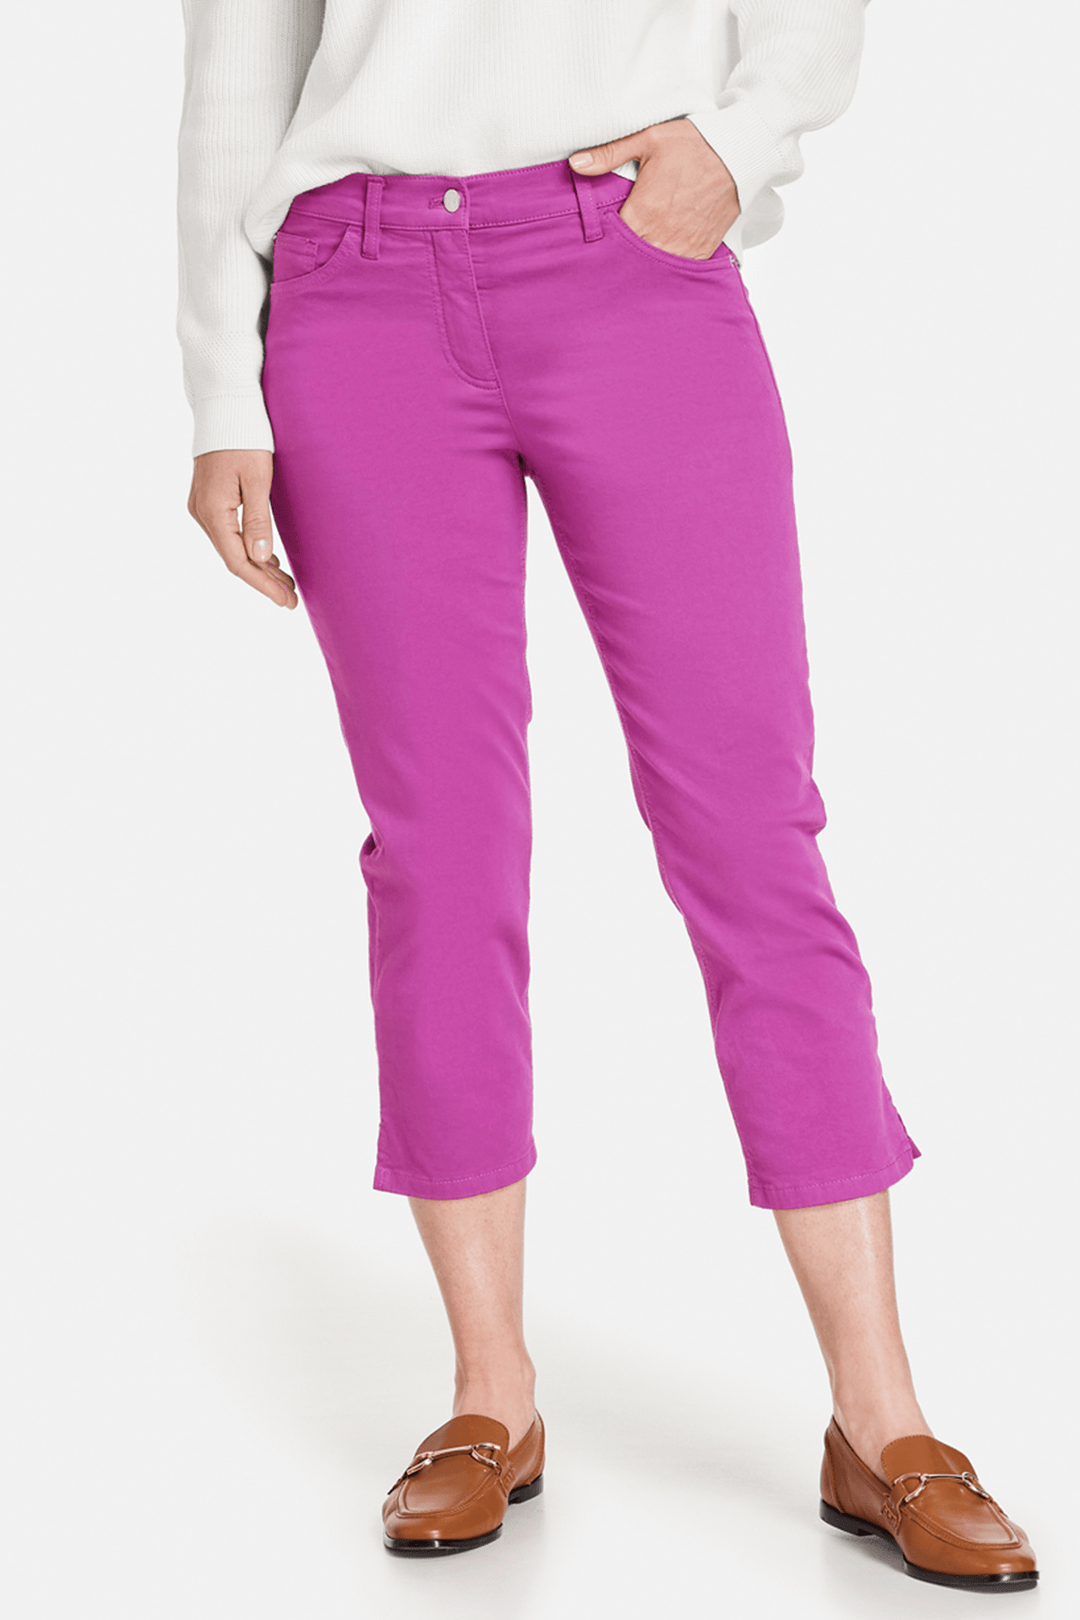 Gerry Weber 822097 Orchid Pink Best4me Cropped Trousers - Experience Boutique